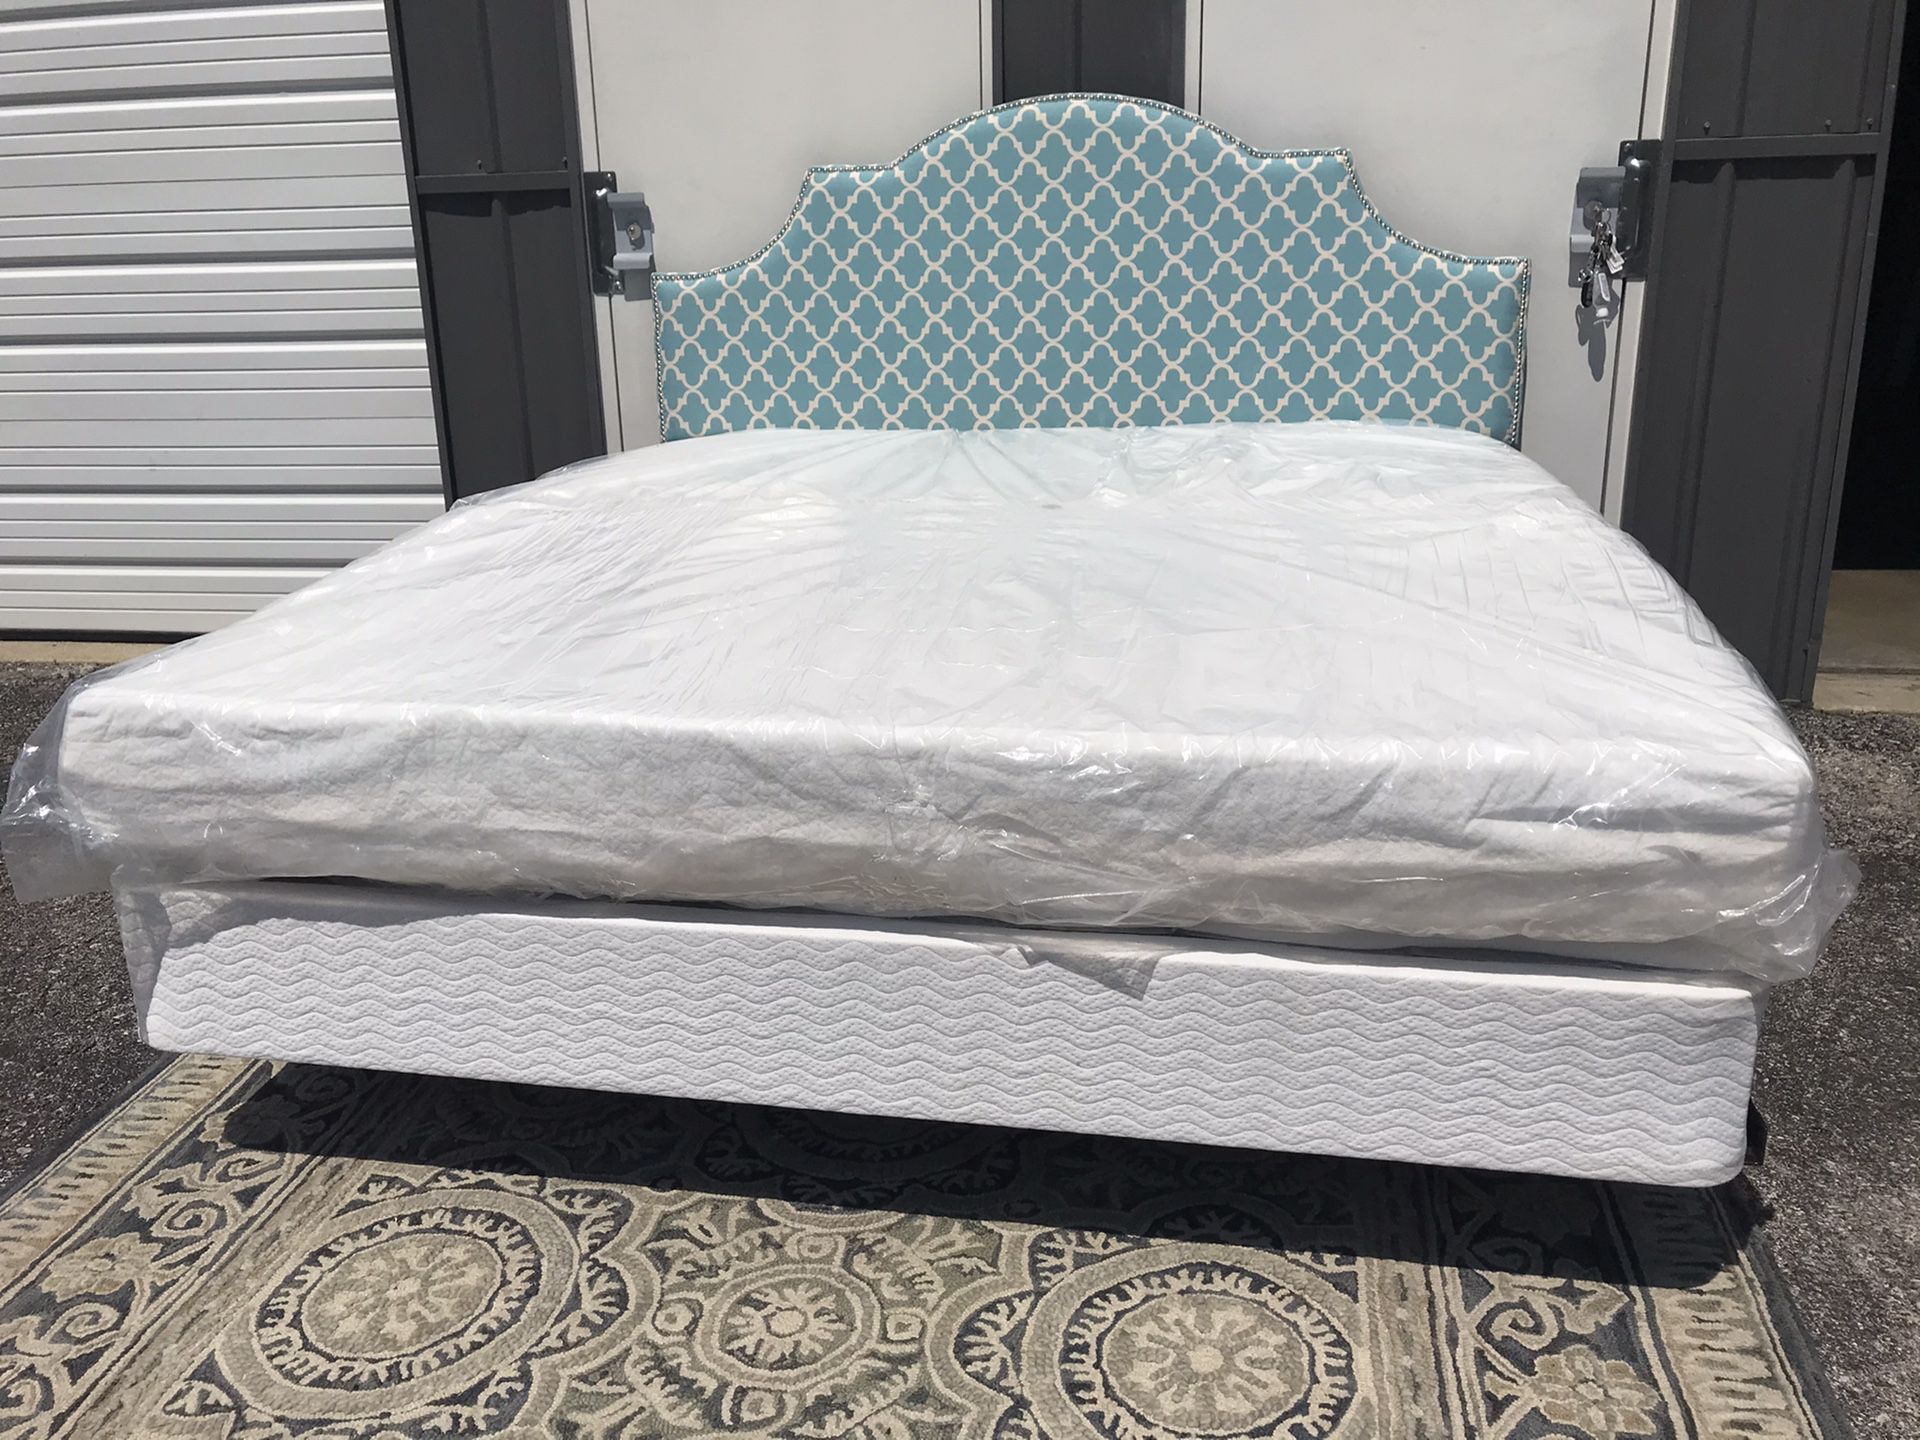 New KING size memory foam mattress and box spring ( frame and headboard NOT included)